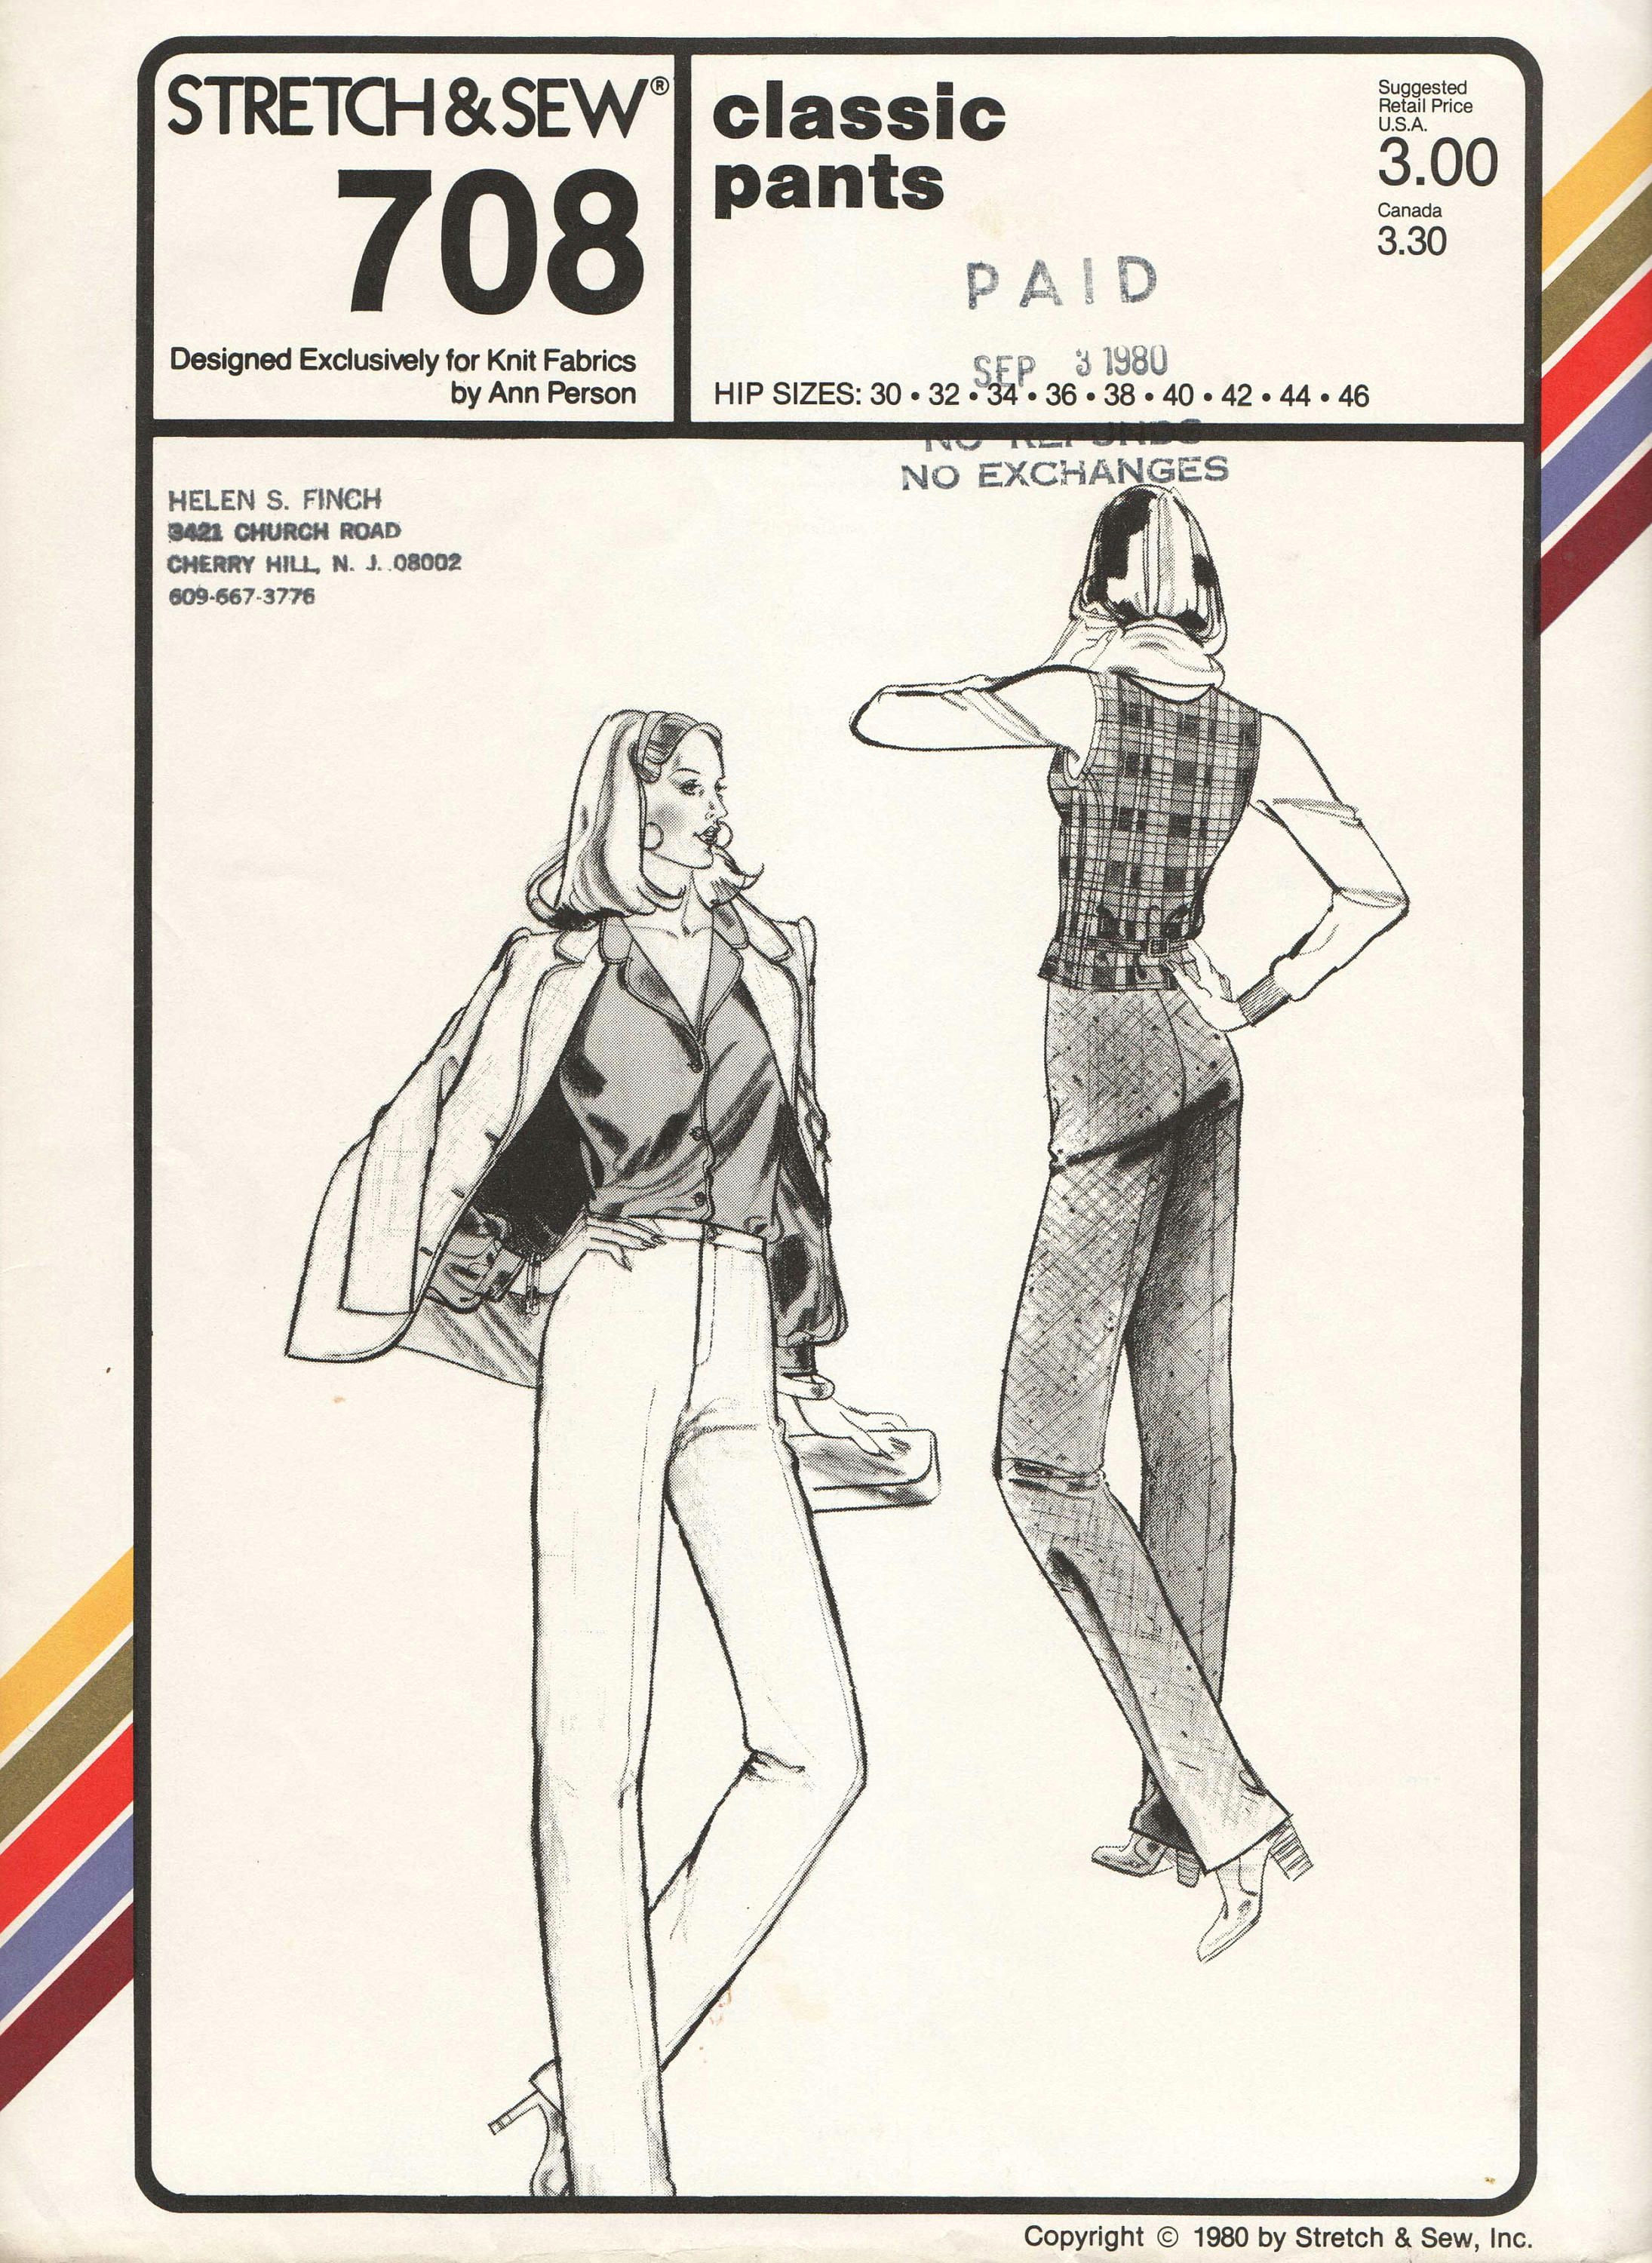 straight leg pants pattern misses classic pants 1980s ann person sewing pattern stretch sew 708 sizes 0 2 4 6 8 10 12 14 16 18 uncut